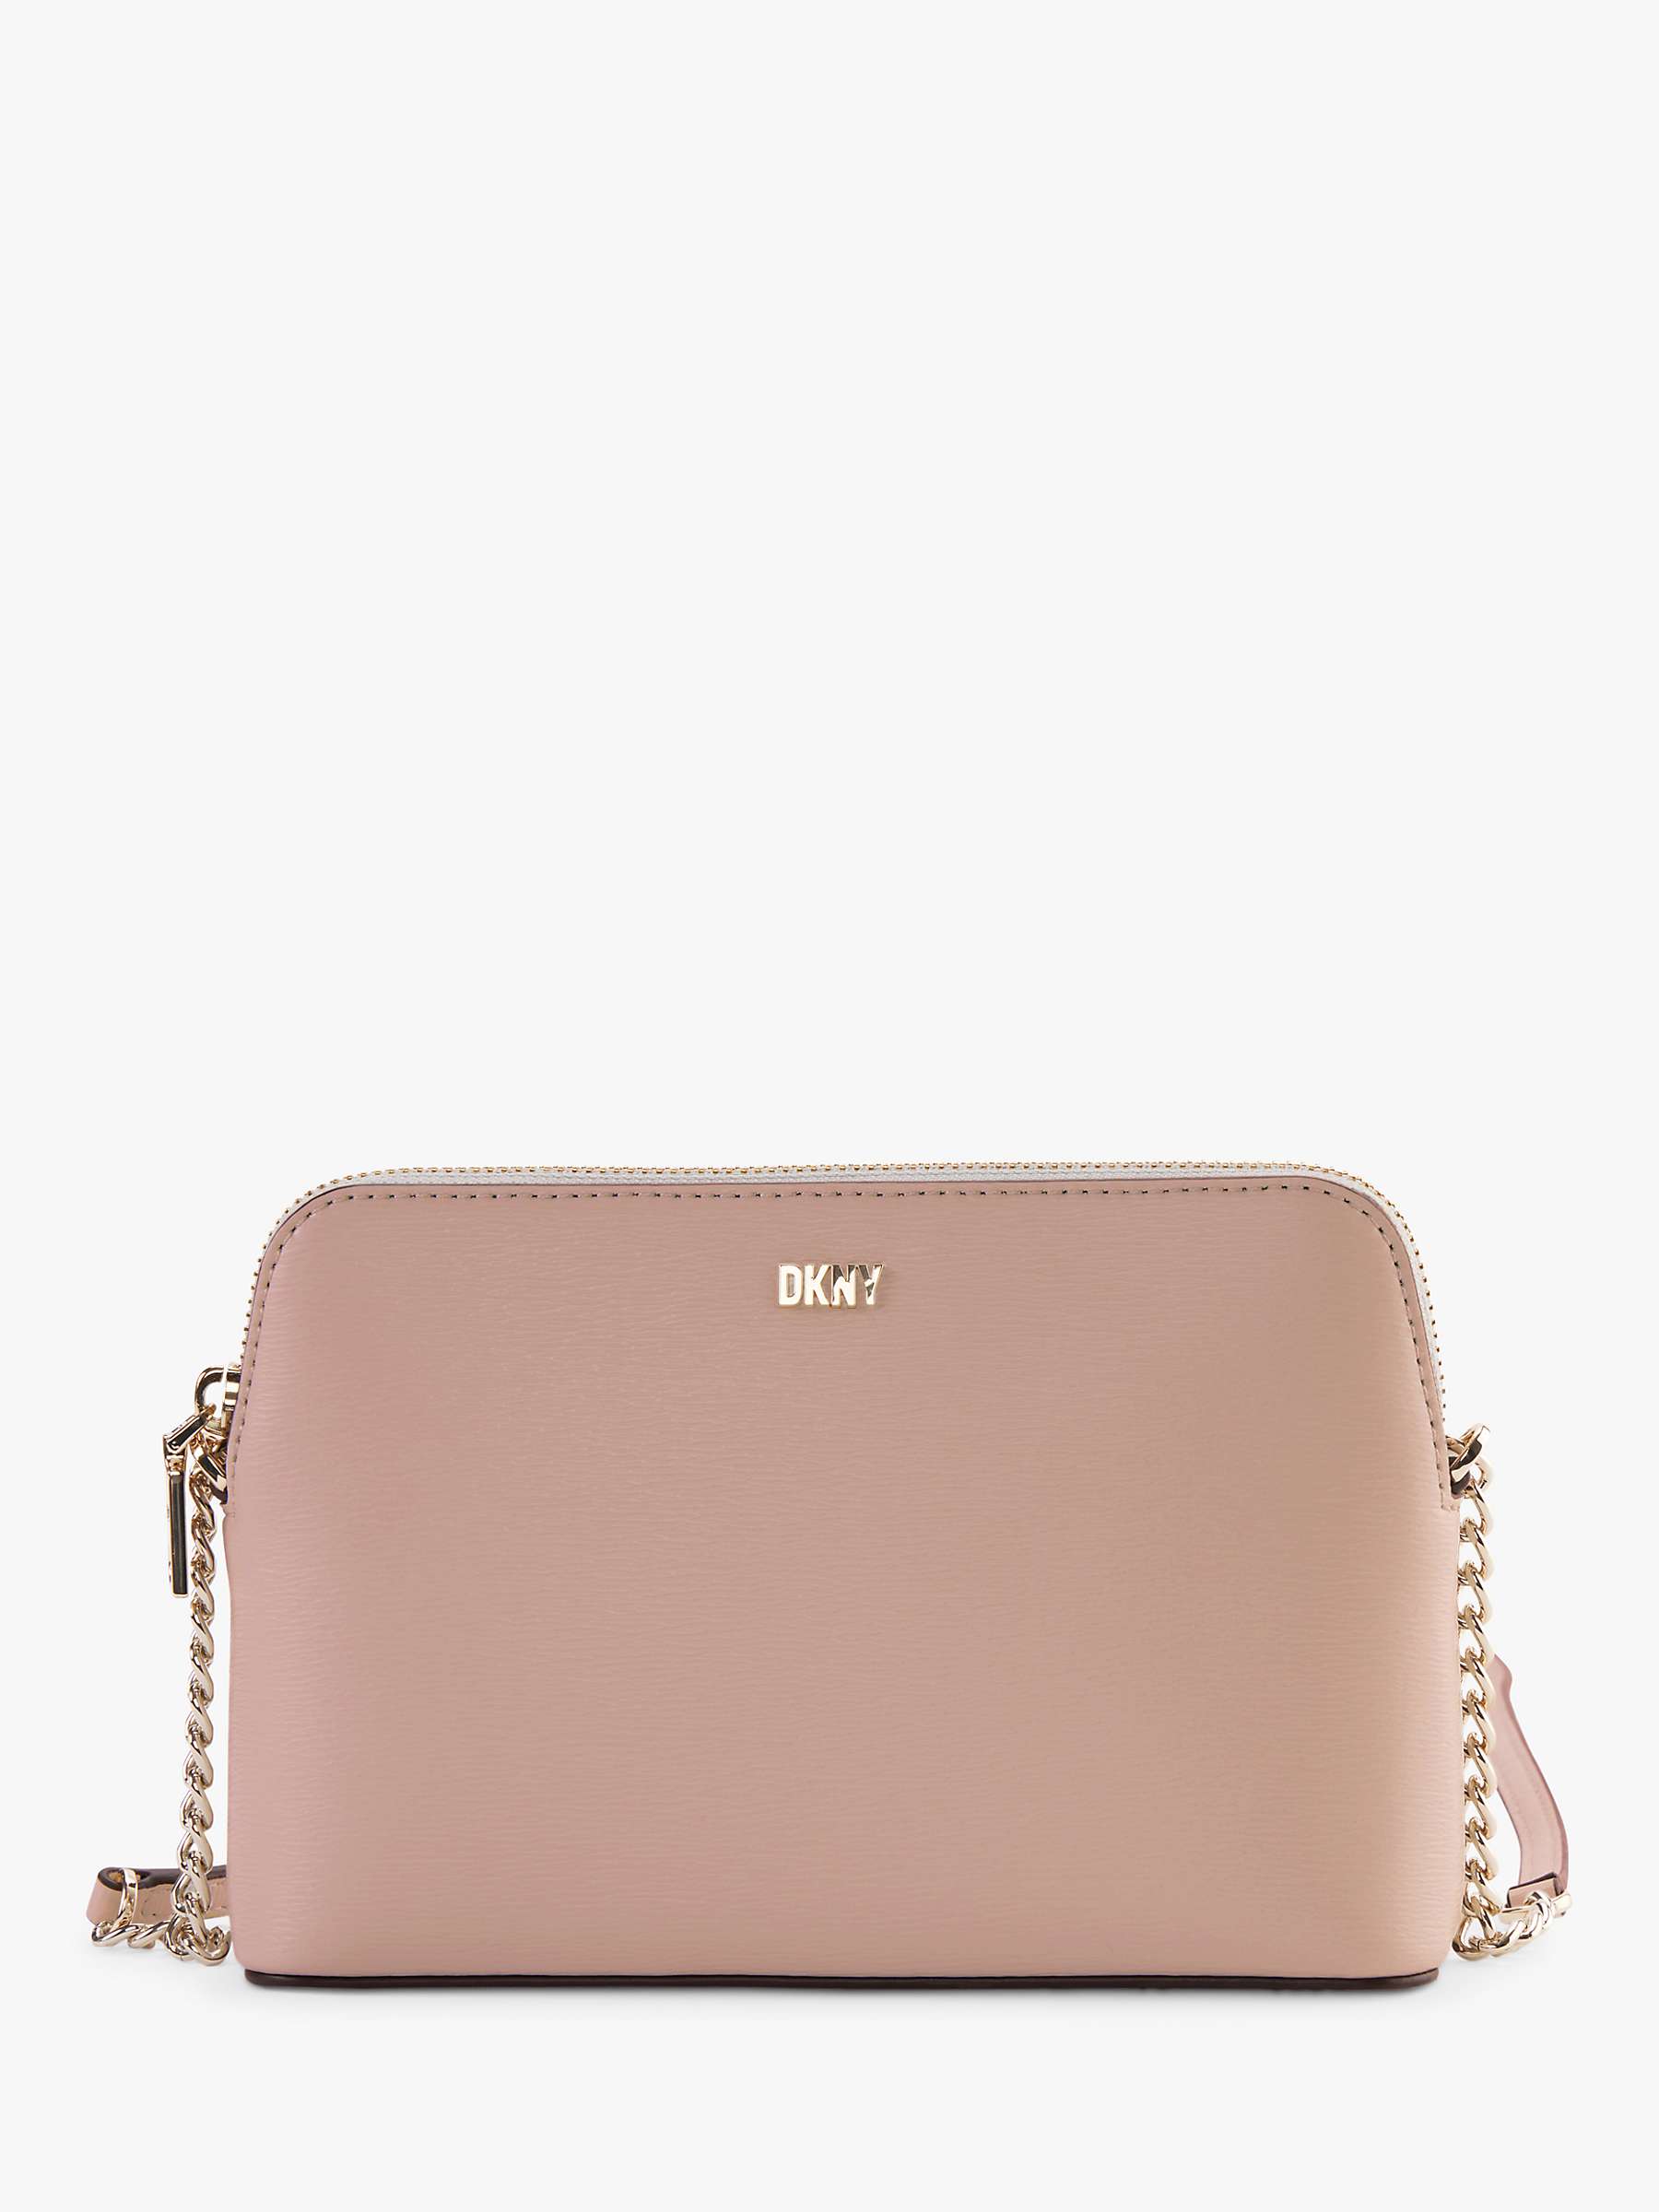 Buy DKNY Bryant Leather Dome Cross Body Bag, Cameo Online at johnlewis.com